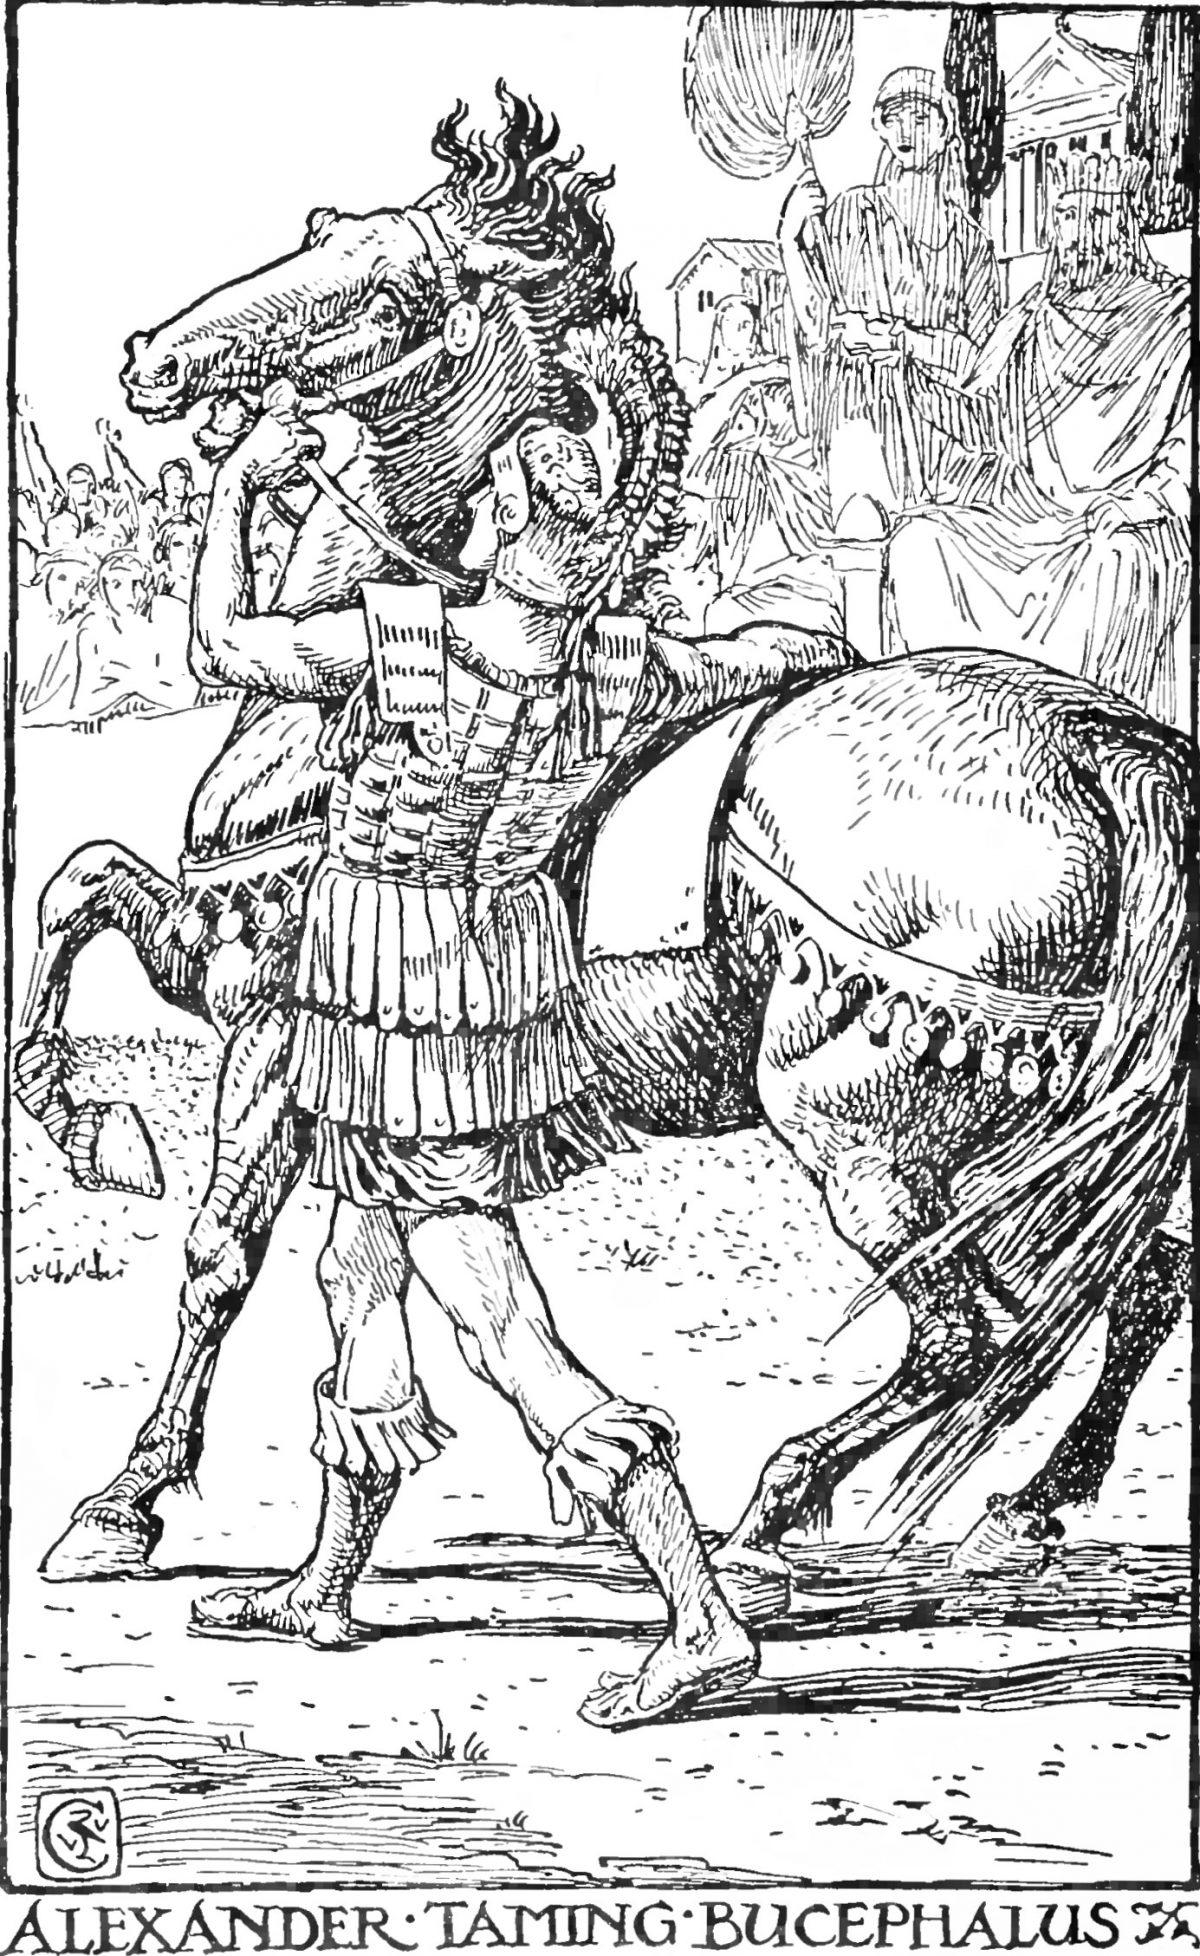 Alexander the Great tames Bucephalus. Illustration from F.J. Gould's "The Children's Plutarch: Tales of the Greeks," 1910.